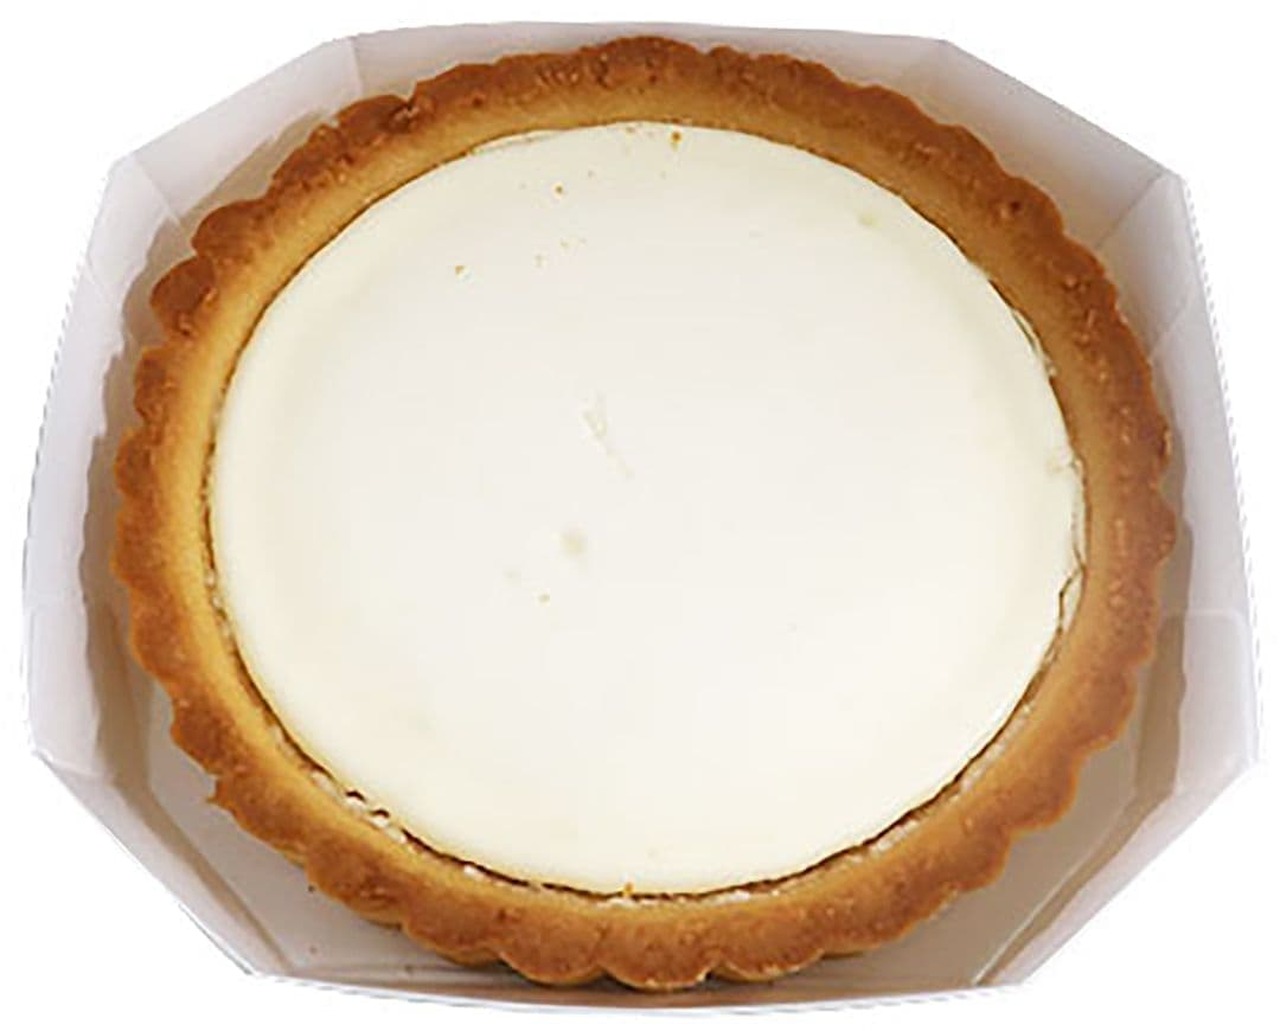 7-ELEVEN "7 Premium Share and Eat Fromage Tart"